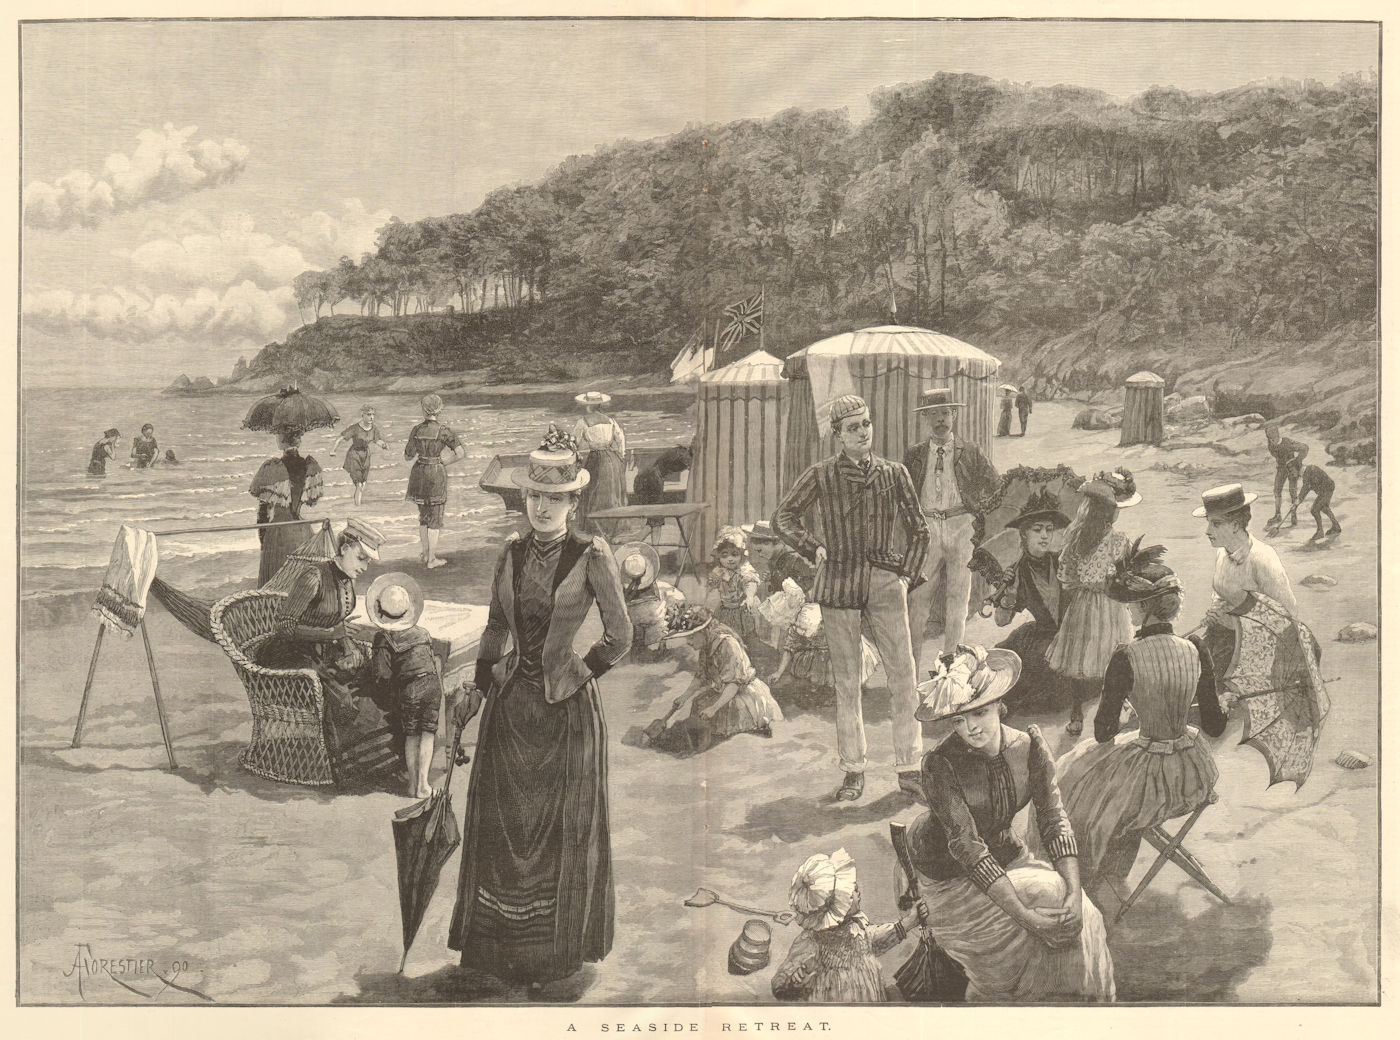 Associate Product A seaside retreat. Society beach. 1890 antique ILN full page print